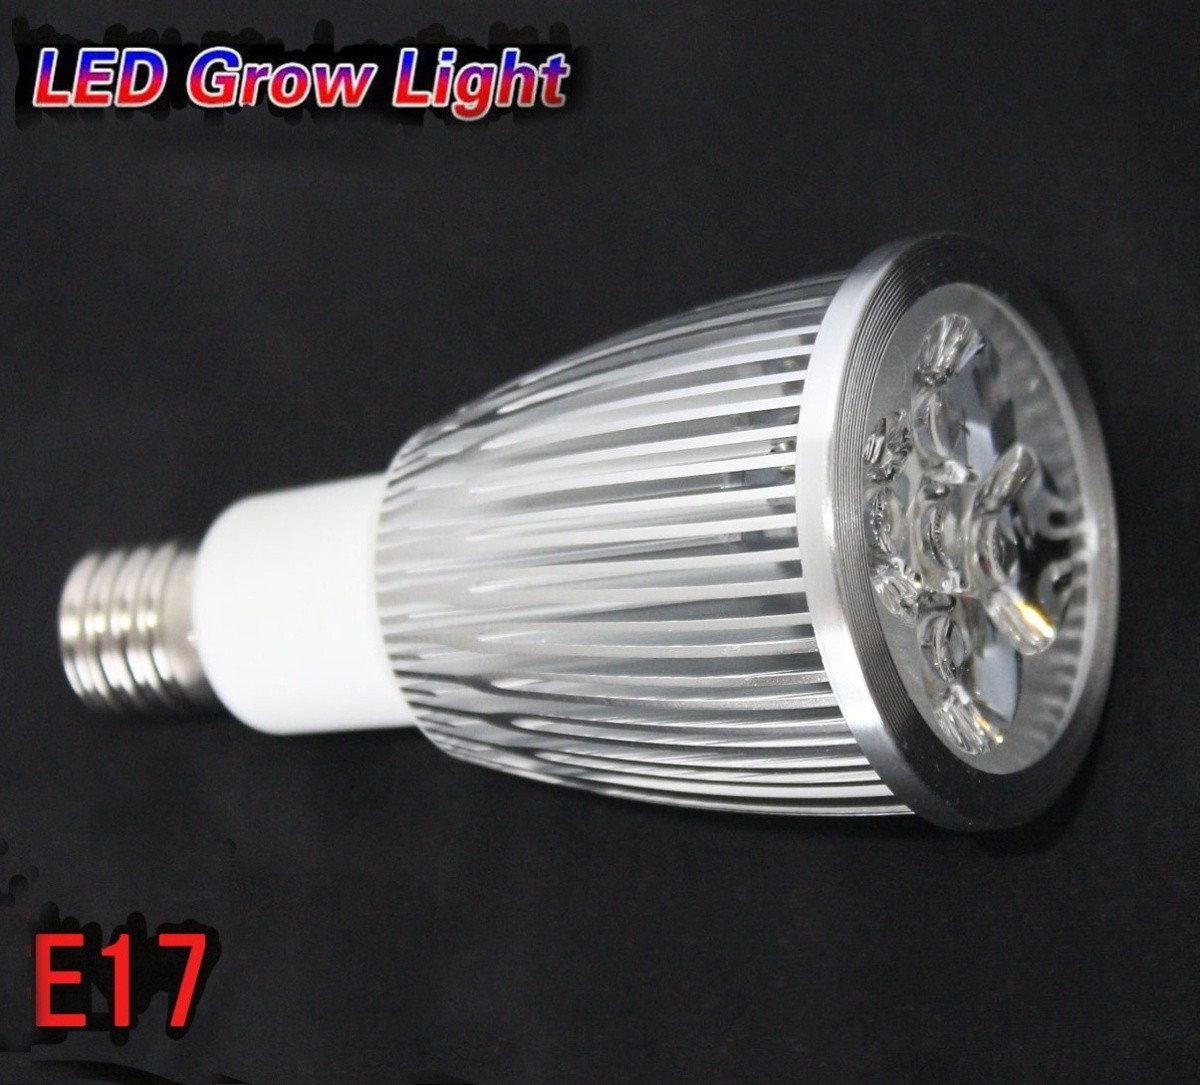 6W white / red .. for plant rearing LED light E17 small size spotlight hydroponic culture interior cultivation general lighting plant rearing for 660nmLED use white / red LED E17 clasp SPLamp-6w